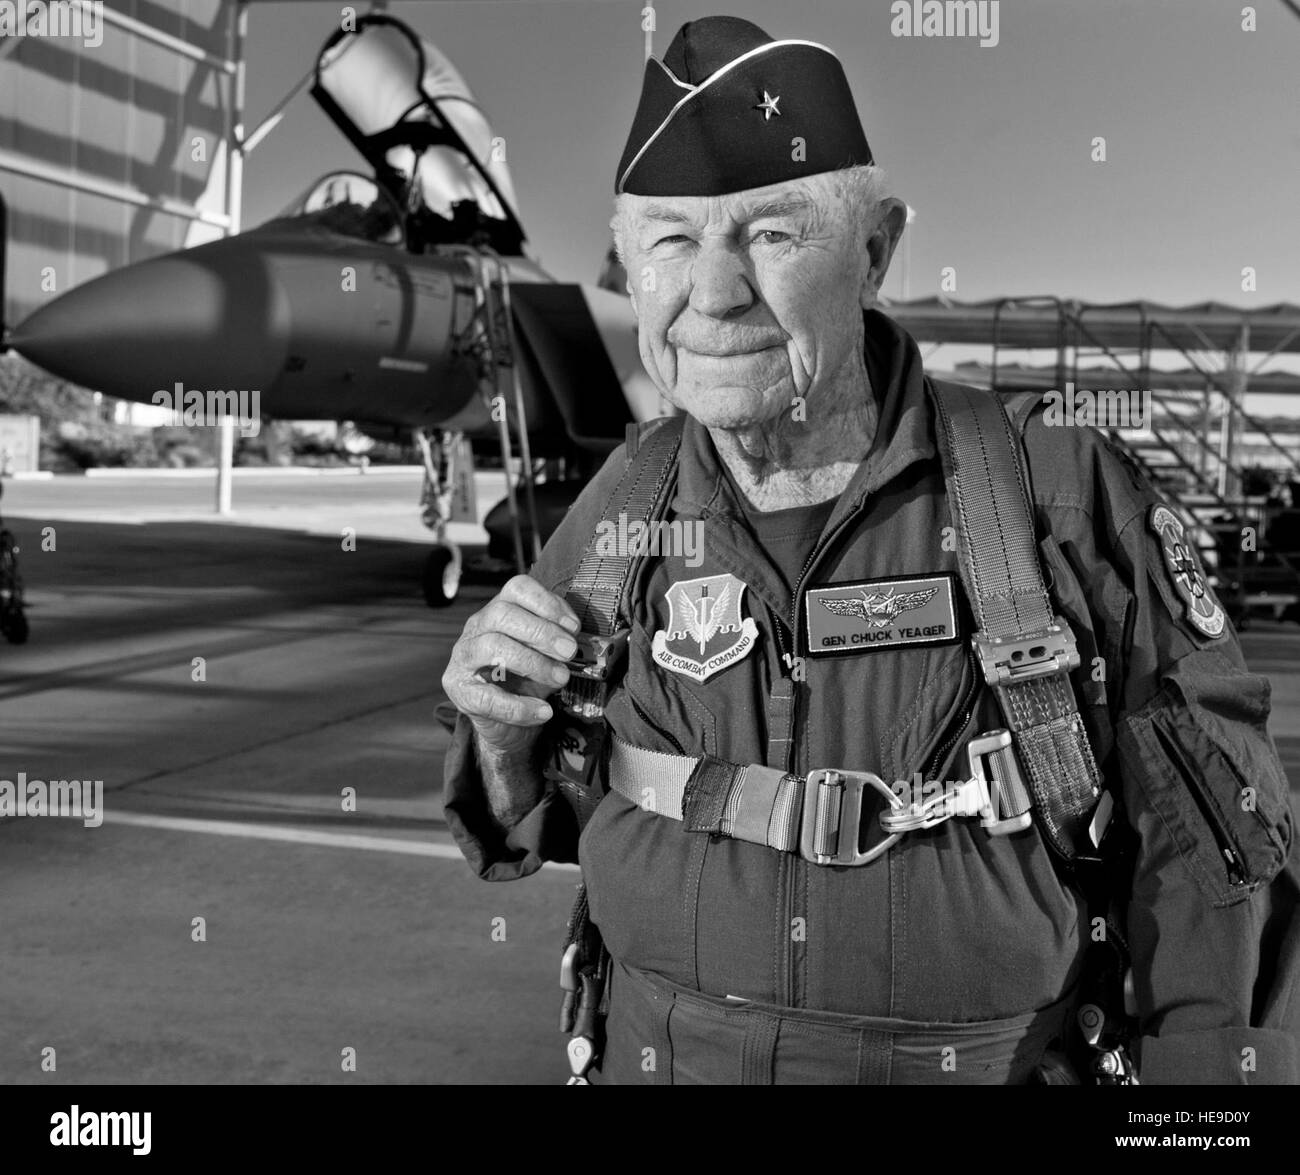 Retired United States Air Force Brig. Gen. Charles E. 'Chuck' Yeager prepares to board an F-15D Eagle from the 65th Aggressor Squadron, Oct. 14, 2012, at Nellis Air Force Base, Nev. In a jet piloted by Capt. David Vincent, 65th AGRS pilot, Yeager is commemorating the 65th anniversary of his historic breaking of the sound barrier flight, Oct. 14, 1947, in the Bell XS-1 rocket research plane named 'Glamorous Glennis.' Yeager was awarded the prestigious Collier Trophy in 1948 for this landmark aeronautical achievement. Stock Photo